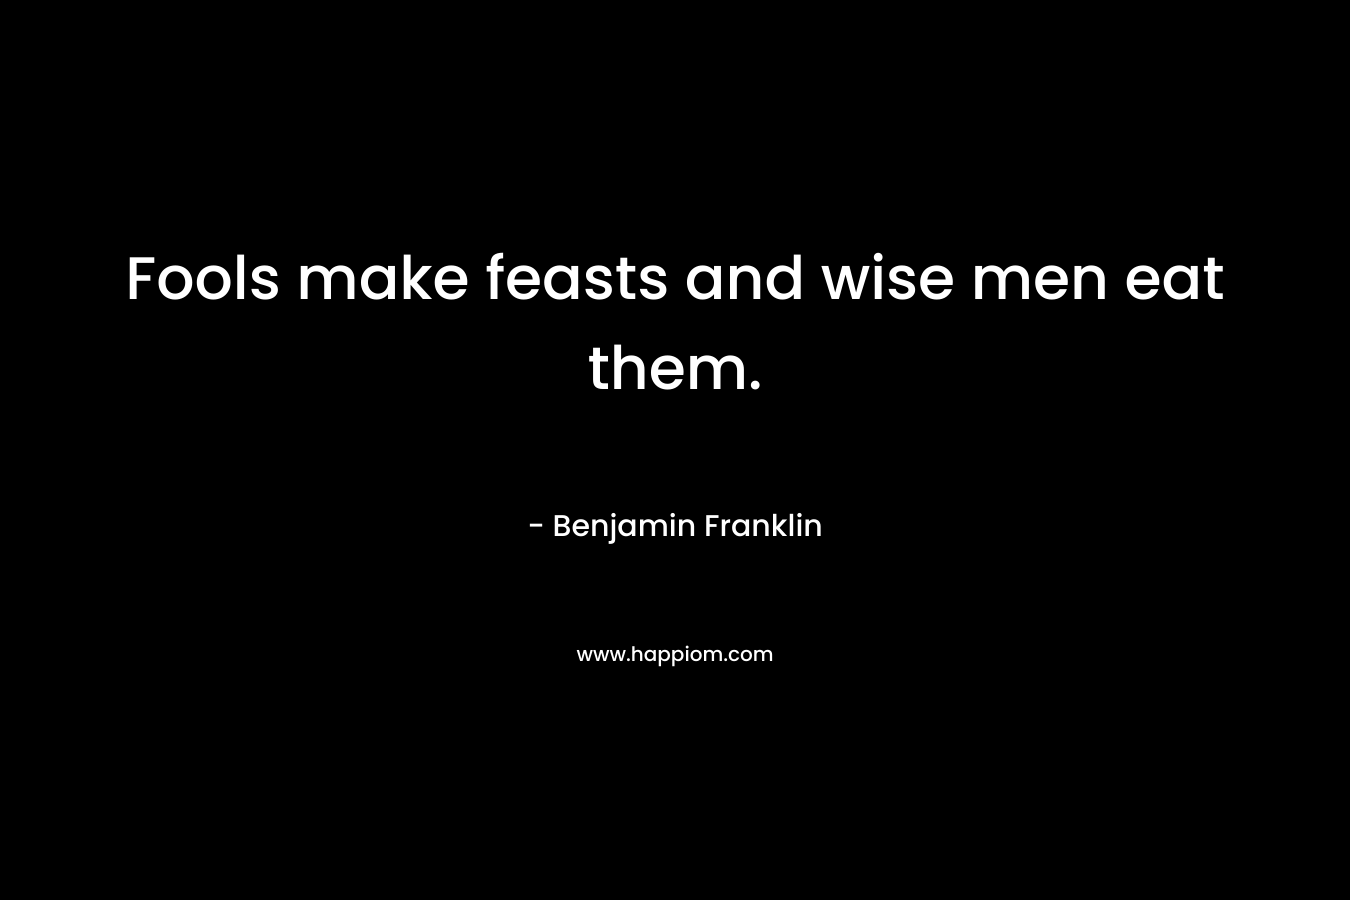 Fools make feasts and wise men eat them. – Benjamin Franklin